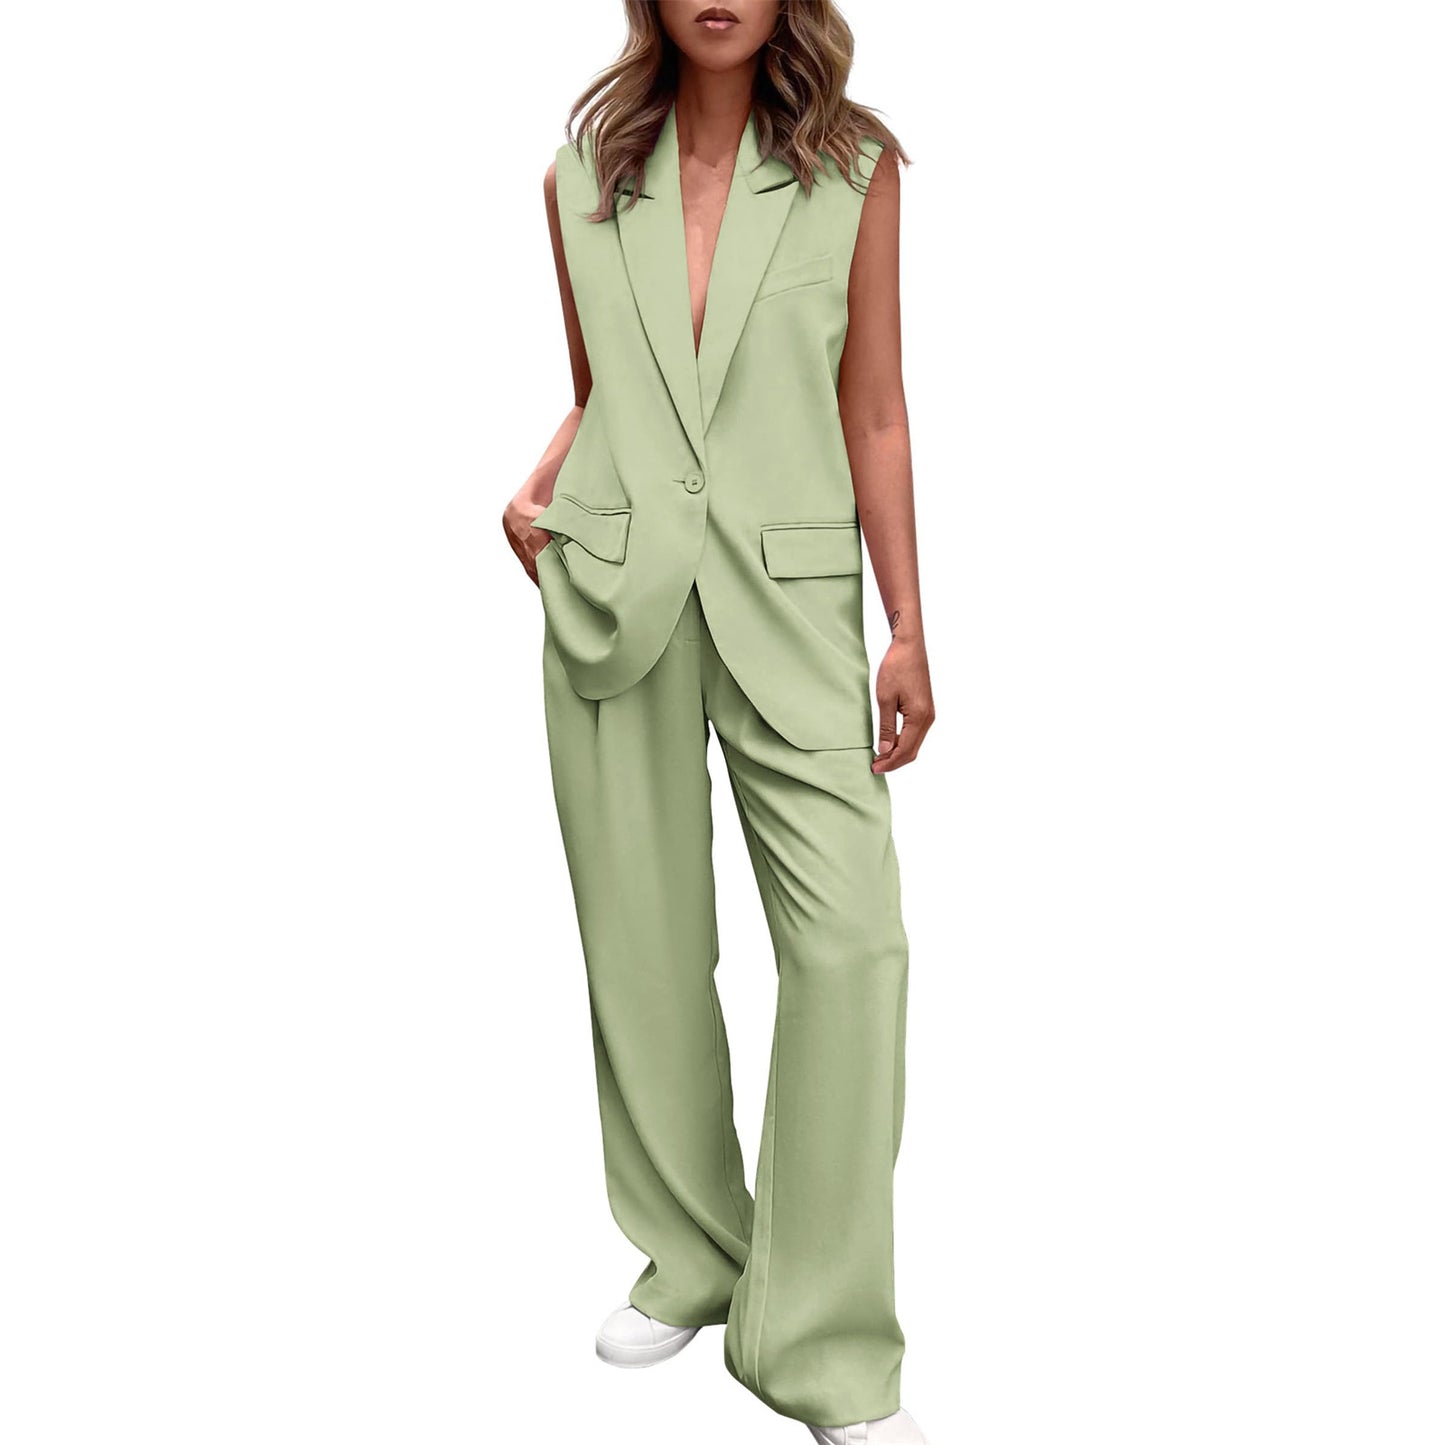 Sleeveless Small Suit and Straight-leg Trousers Suit for Women's Fashion